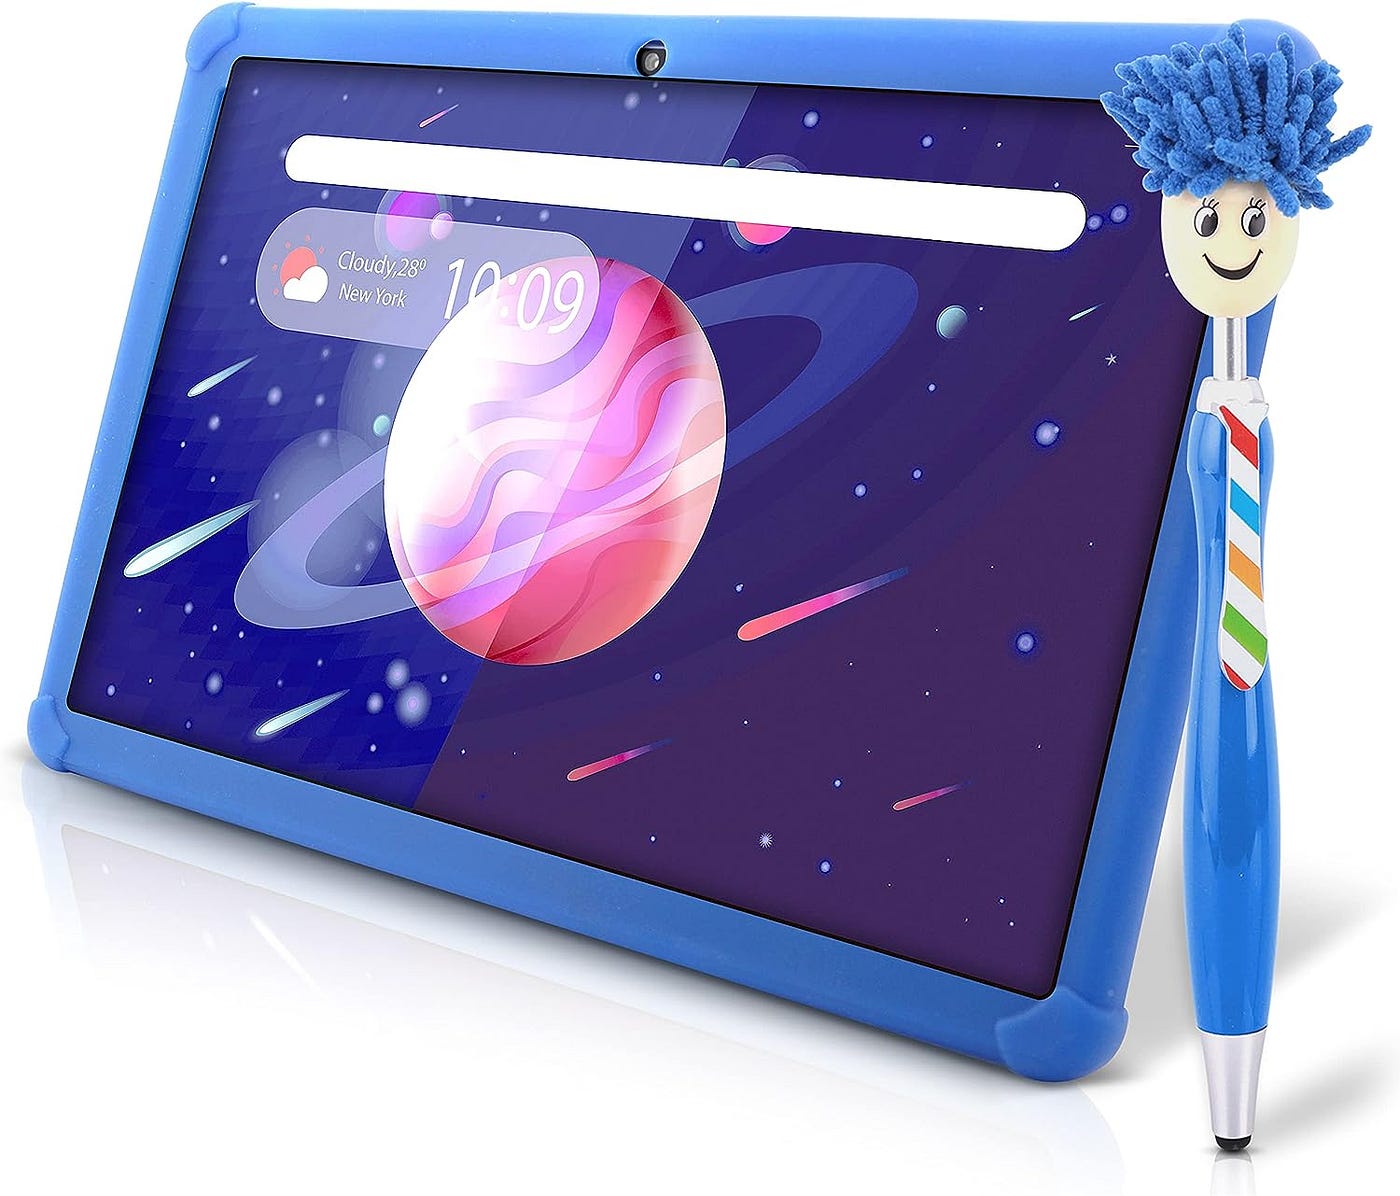 Pyle Kids Tablet with Stylus Pen: A 7-Inch Adventure in Learning | by  Farheen Kousar | Medium